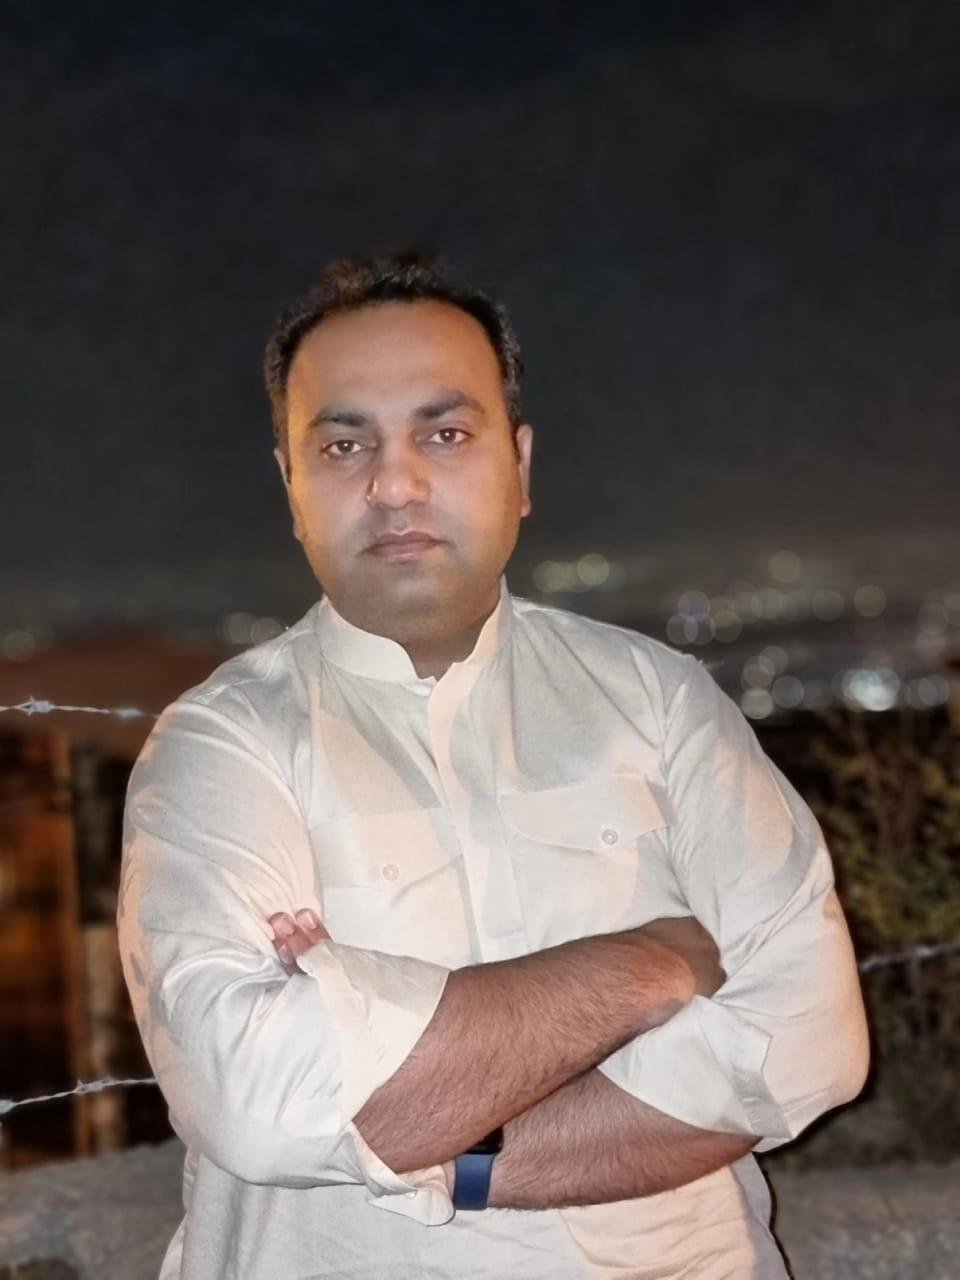 Muhammad Kamran started out by moderating the PTIs website in 2007 and ended up leading its digital media team.